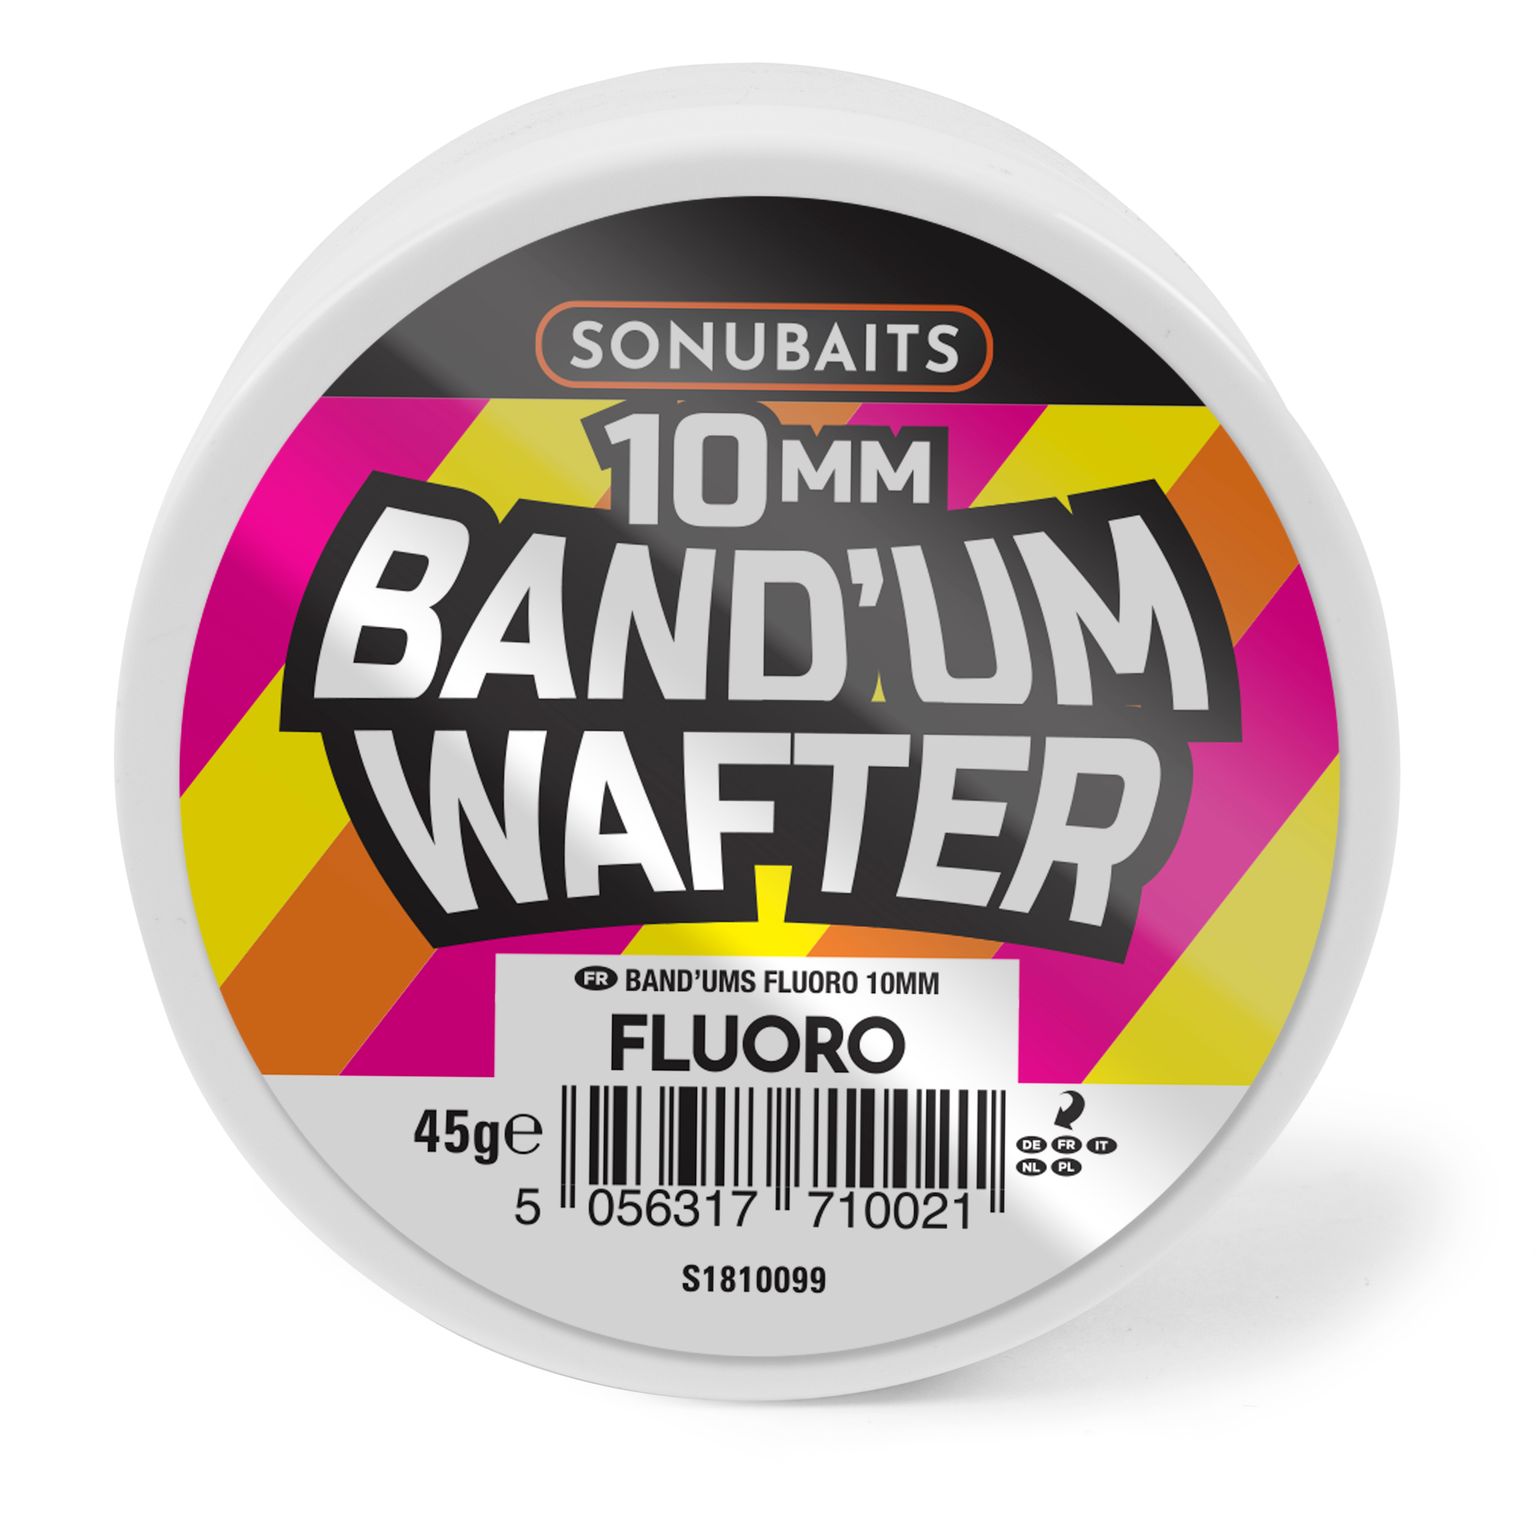 Sonubaits Band'um Wafters Fluoro 10mm